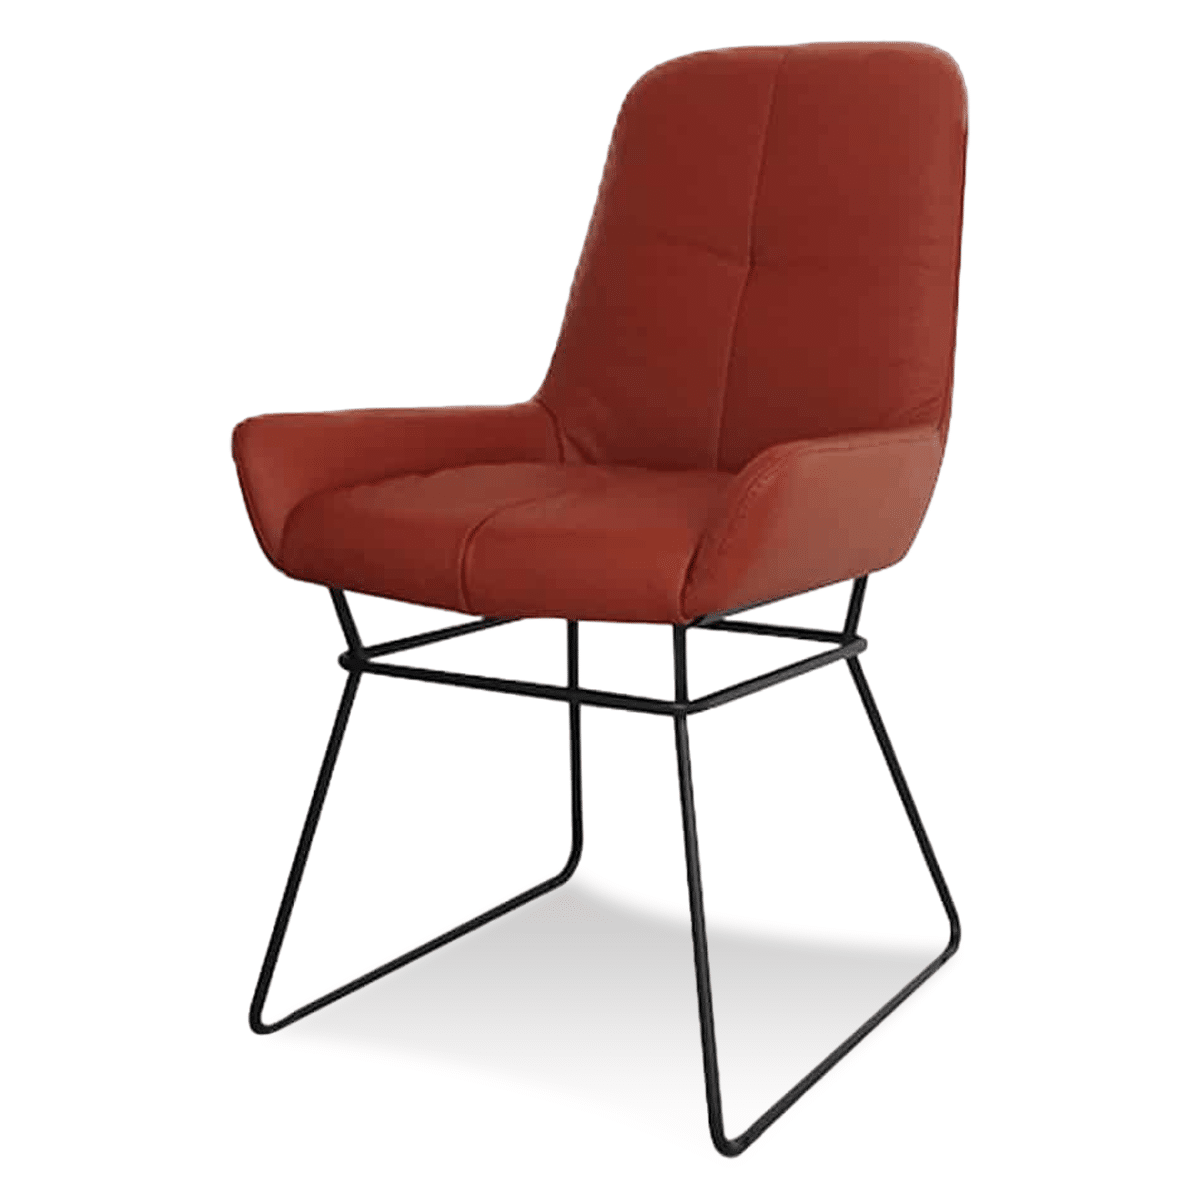 Elliot Dining Chair – Cotto